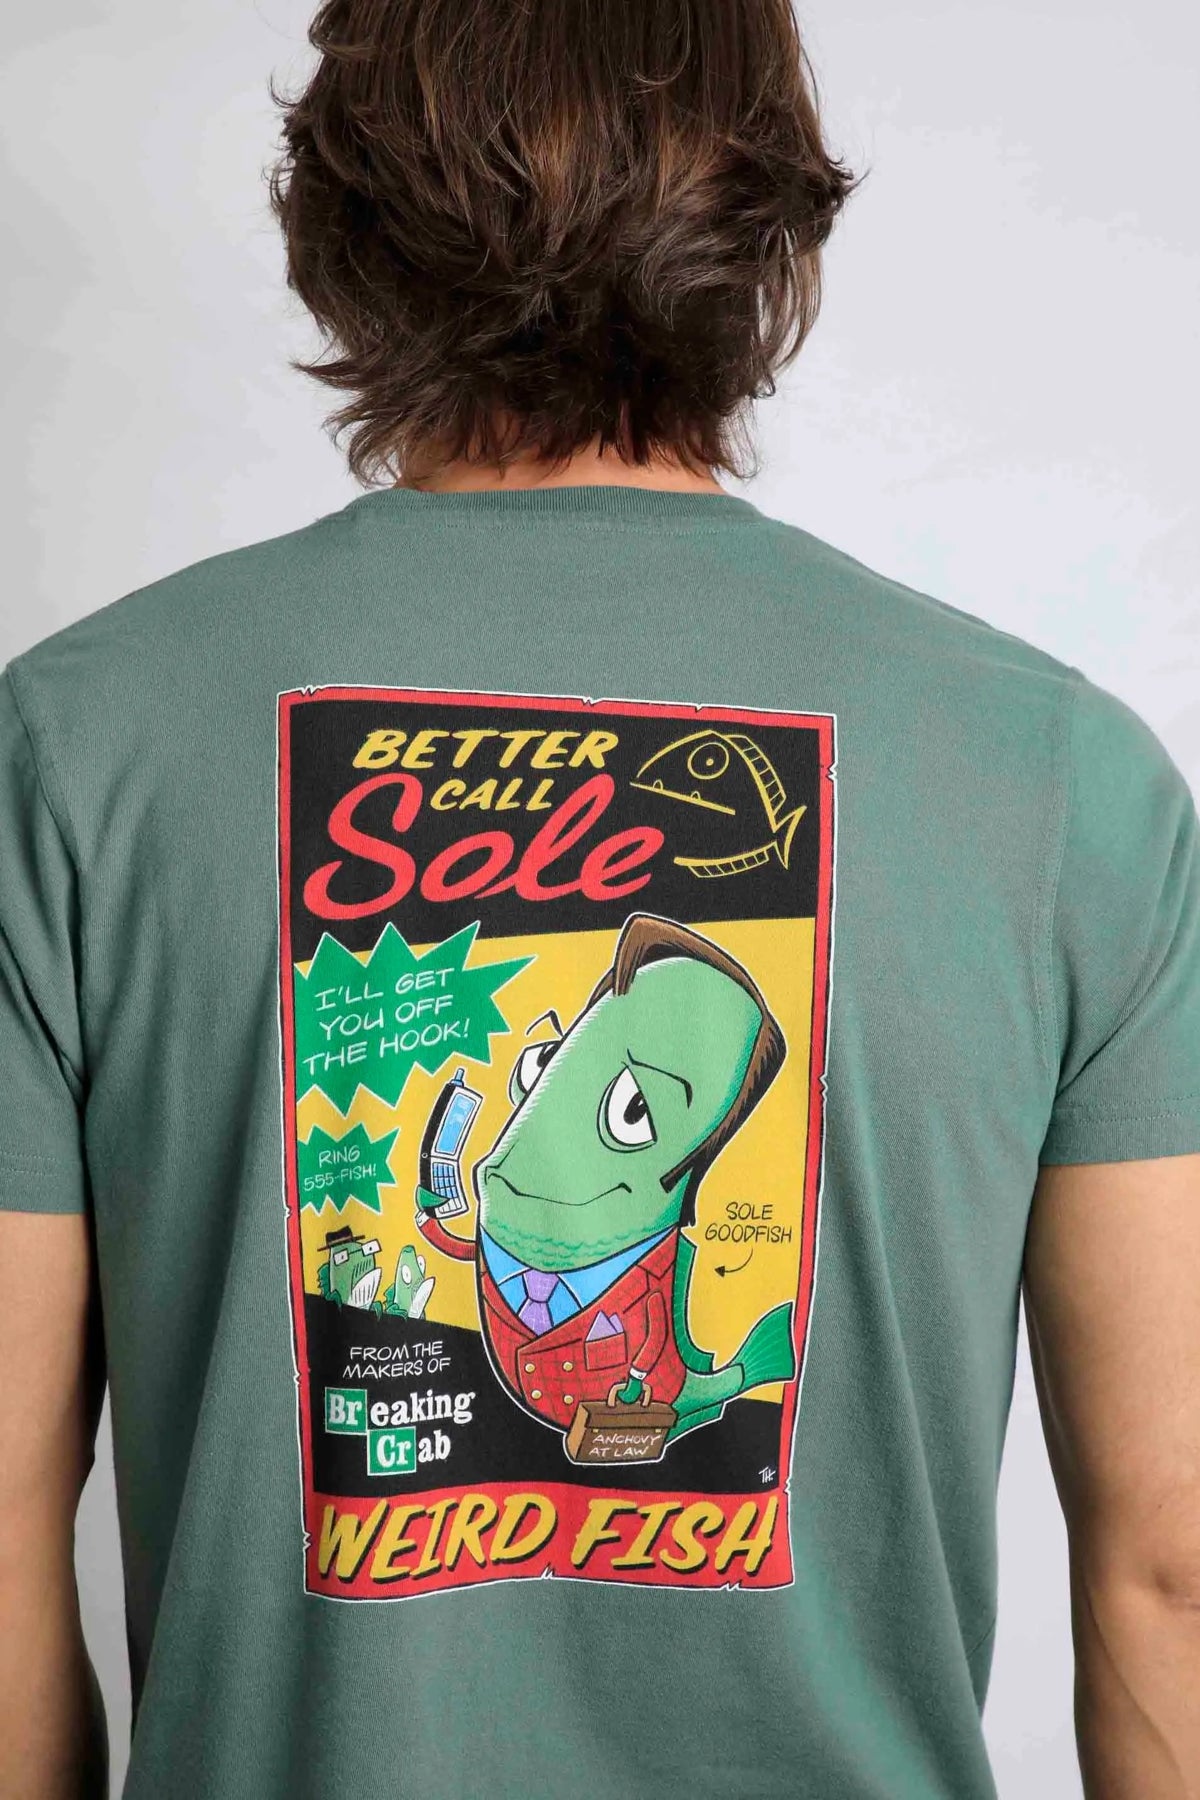 Men's Call Sole printed short sleeve tee from Weird Fish in Dusky Green, parody of the Better Call Saul TV series.